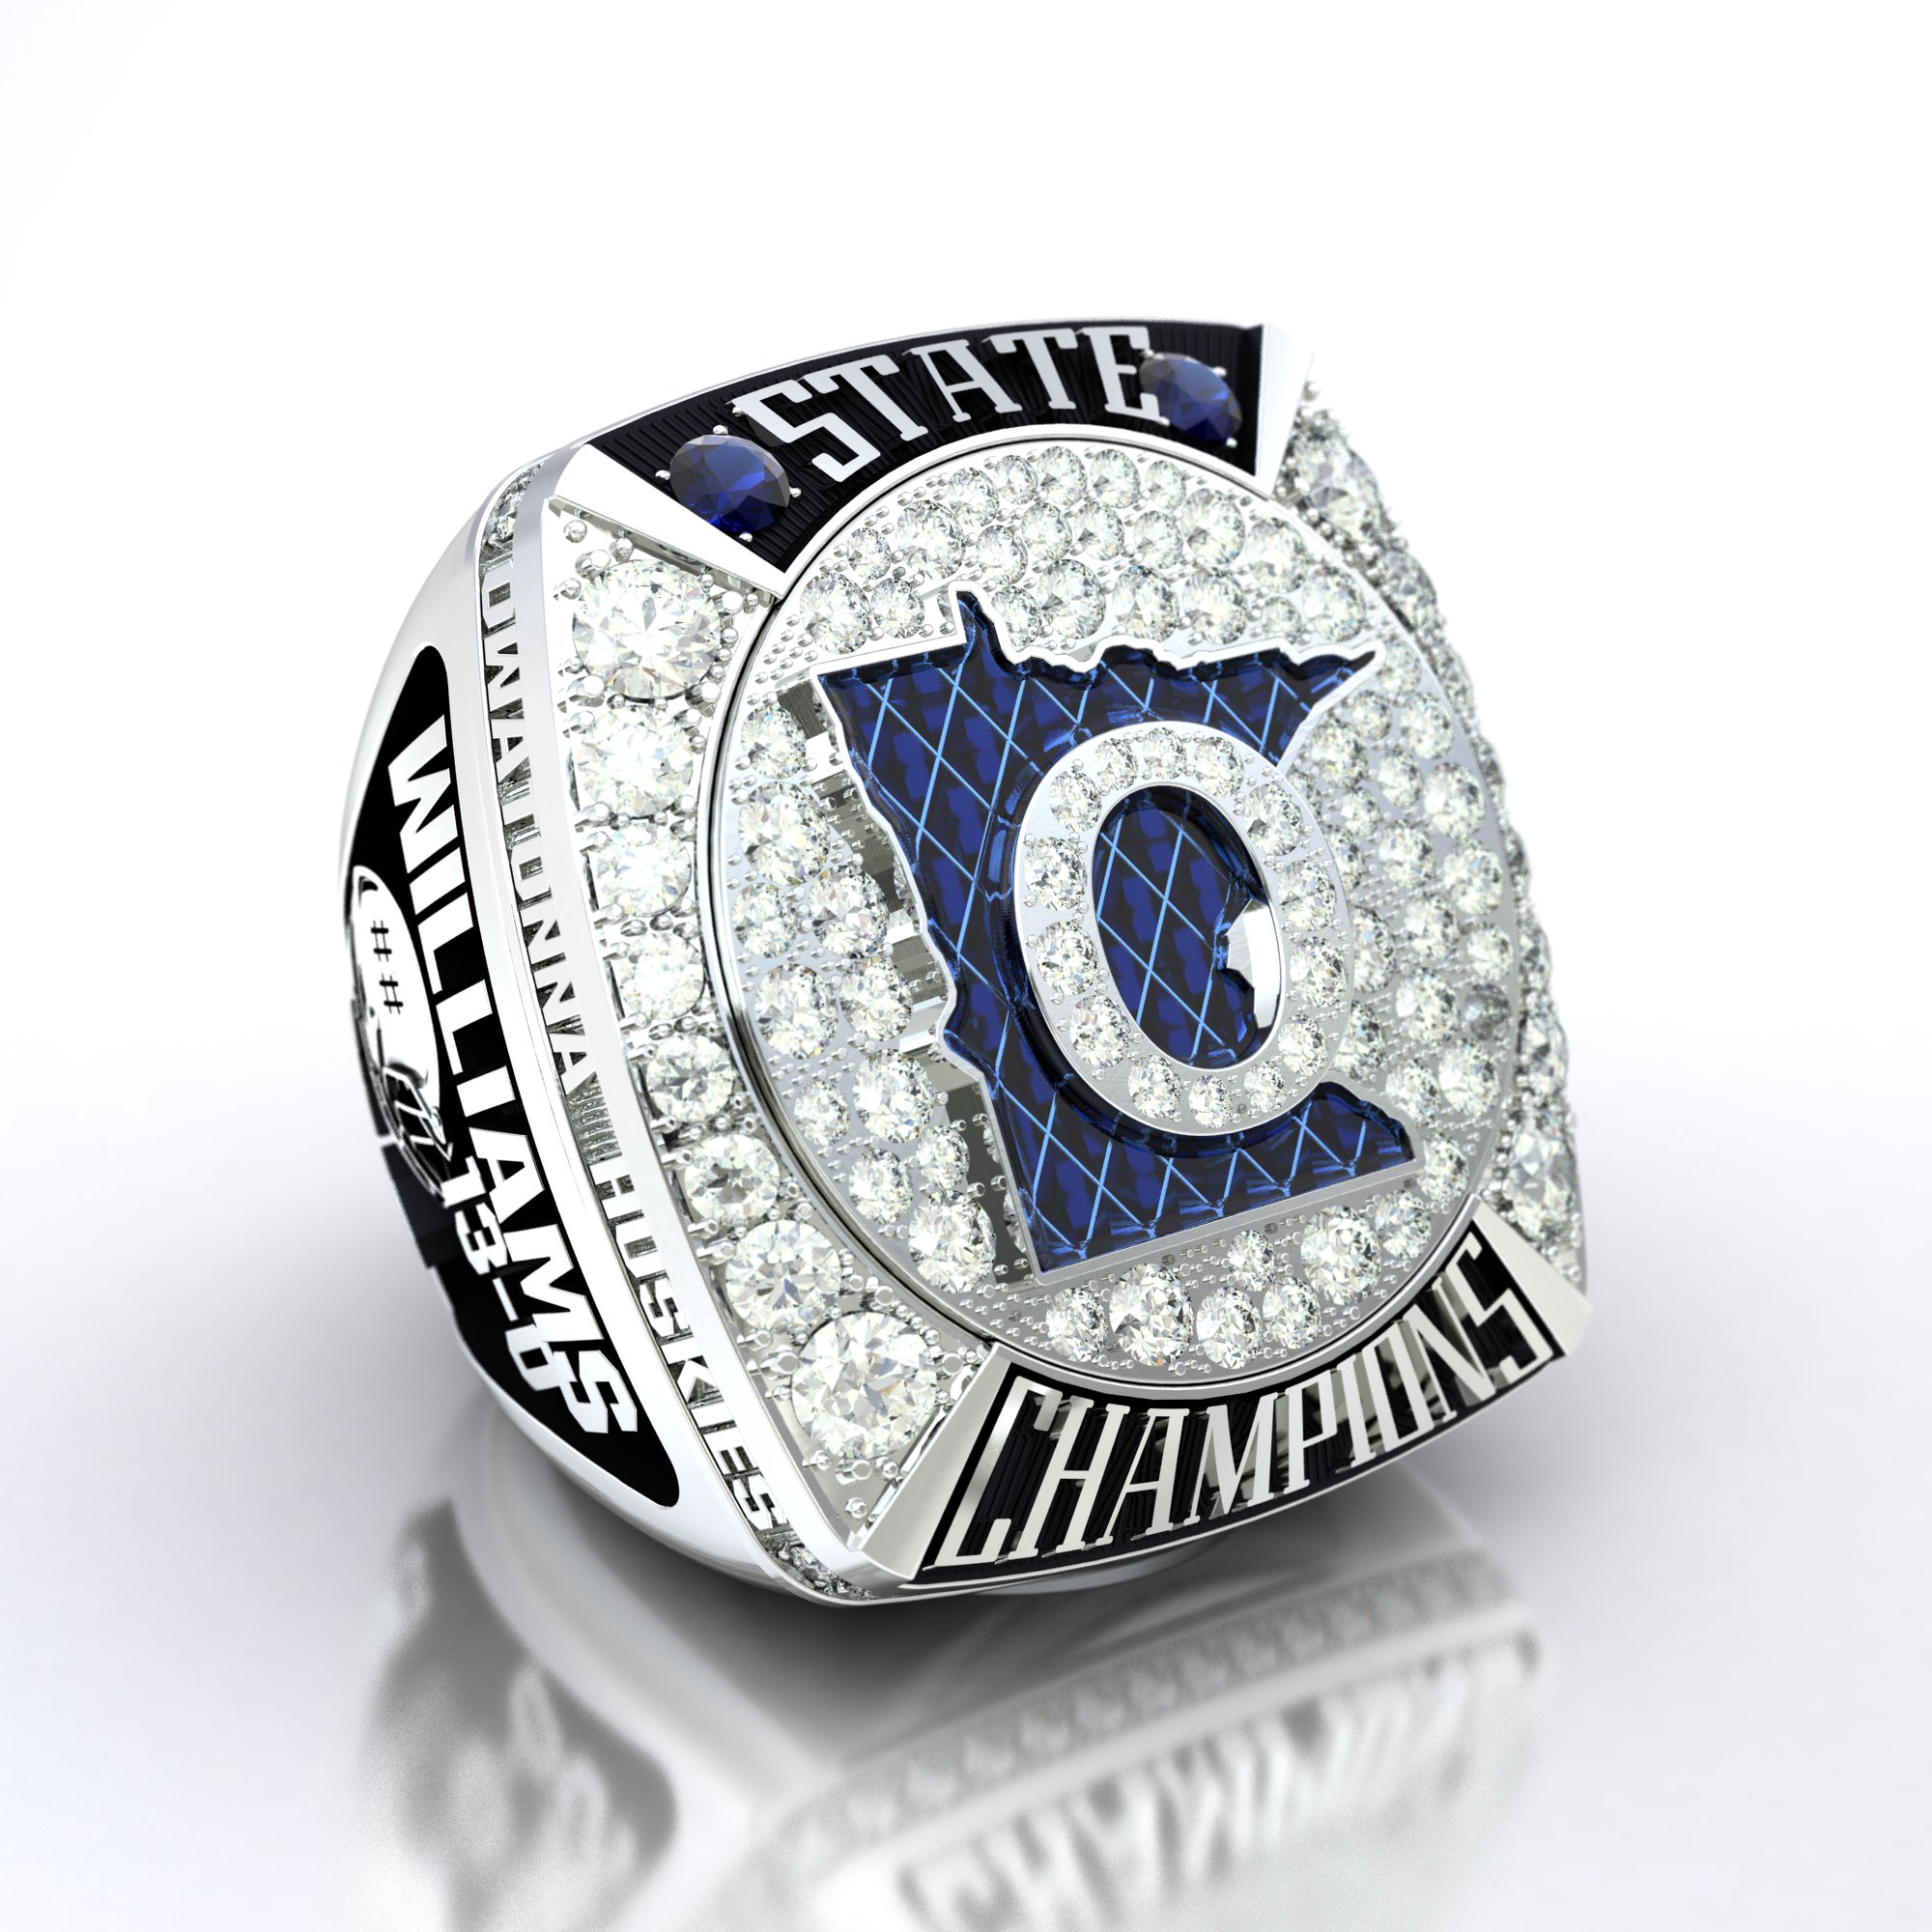 The Owatonna High School Huskies 2018 MN State Football Championship ring, by Jostens. 